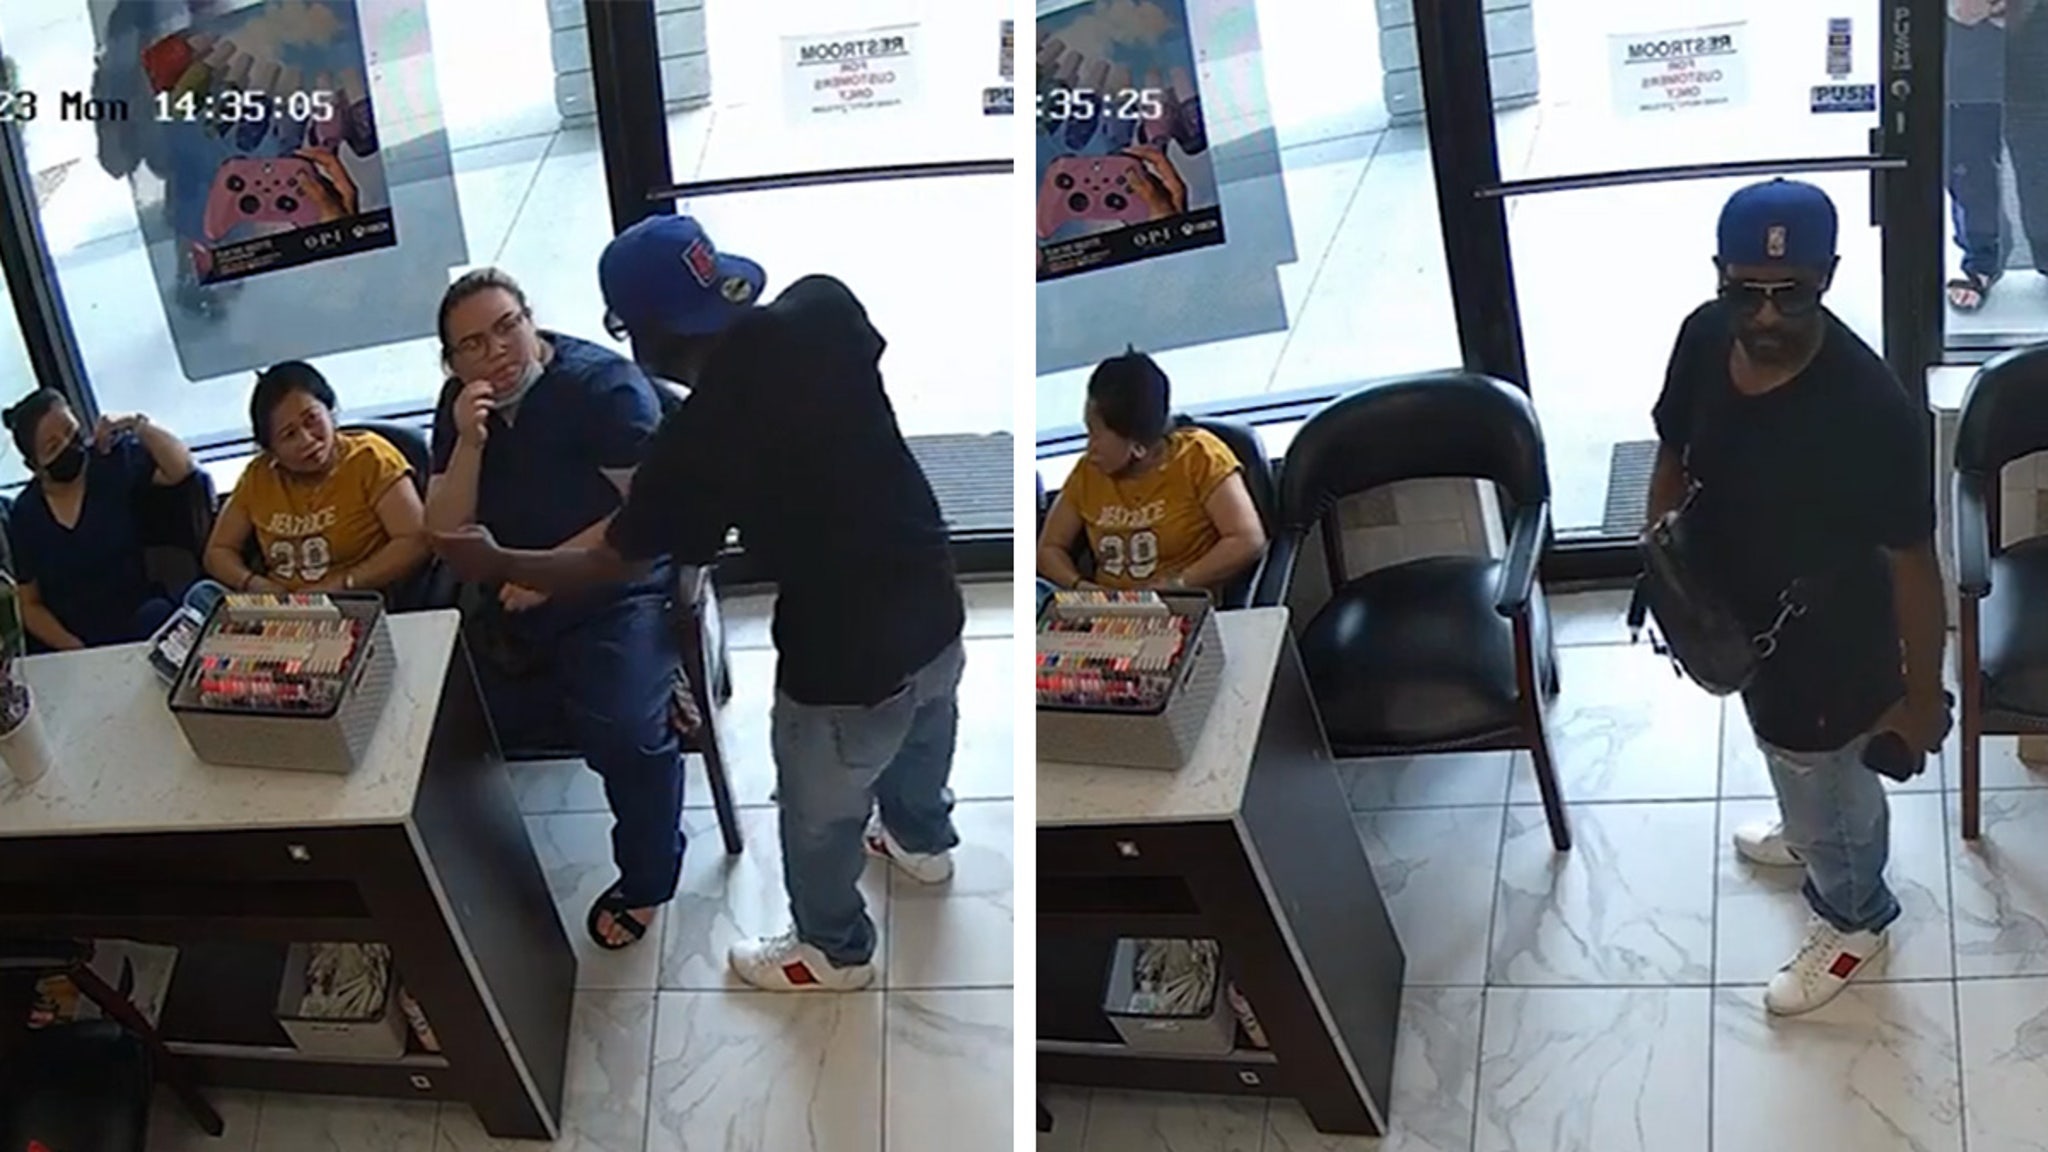 Attempted Robber Fails at Nail Salon Holdup as Customers Ignore Him